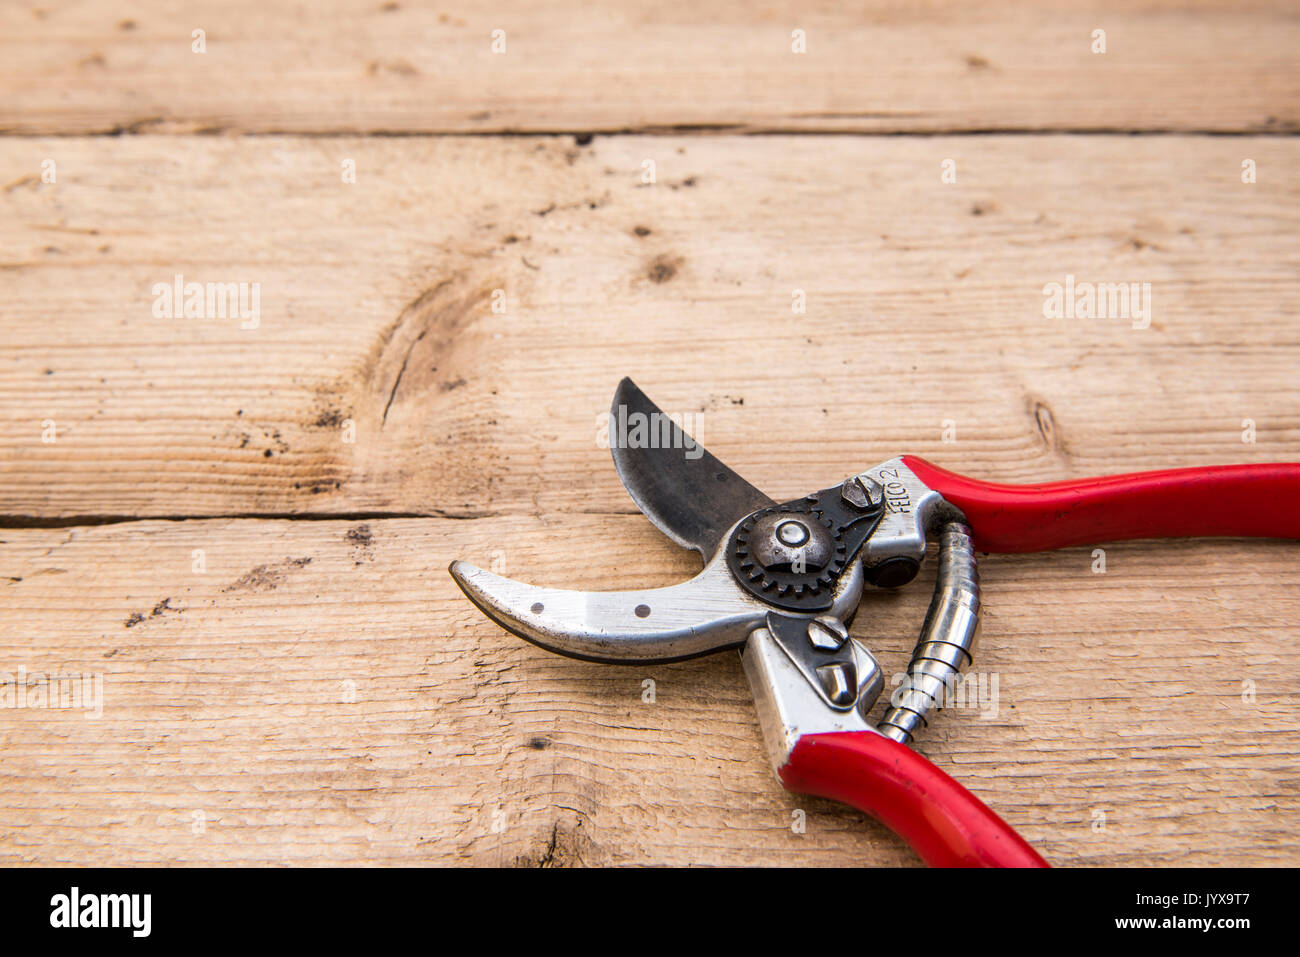 Pair of Felco secateurs laying open on a wooden bench. Stock Photo